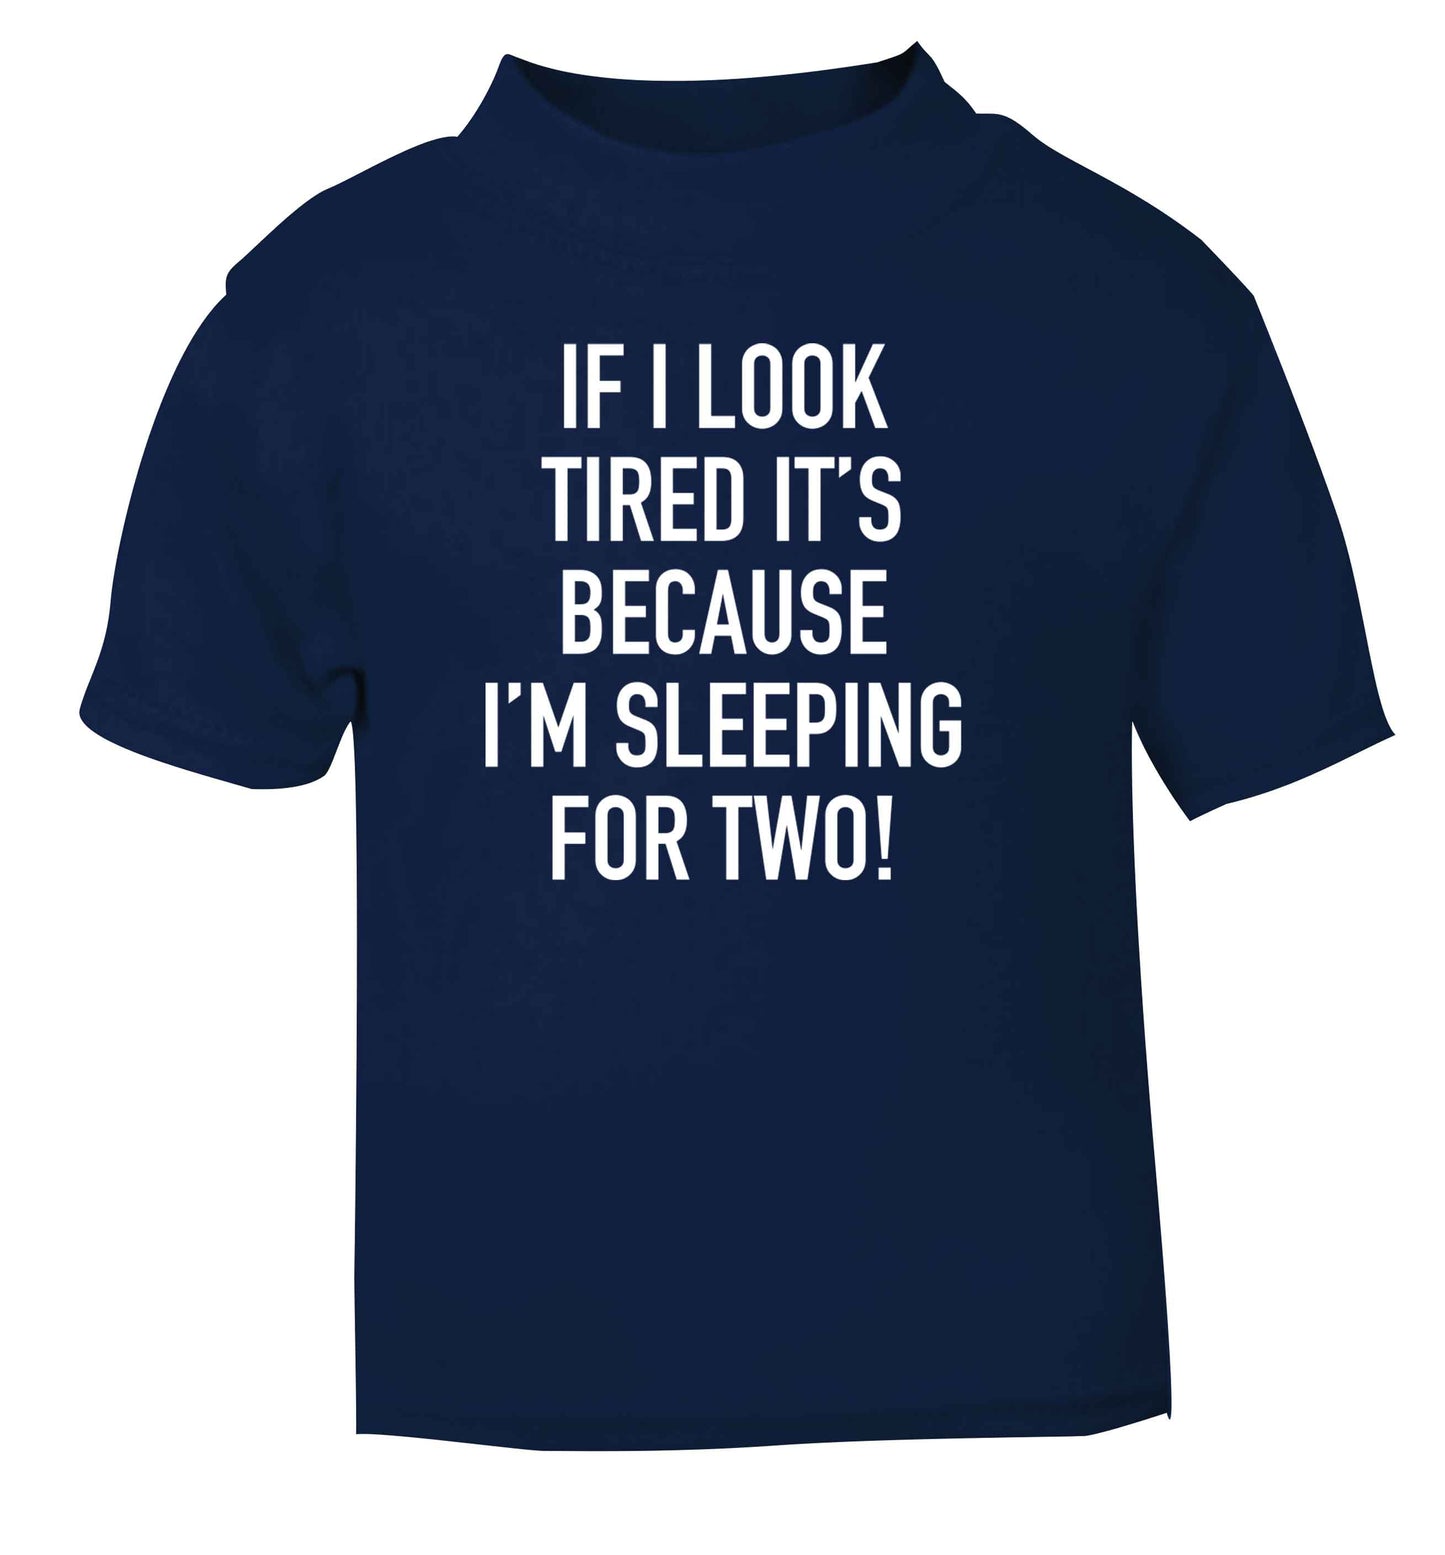 If I look tired it's because I'm sleeping for two navy Baby Toddler Tshirt 2 Years